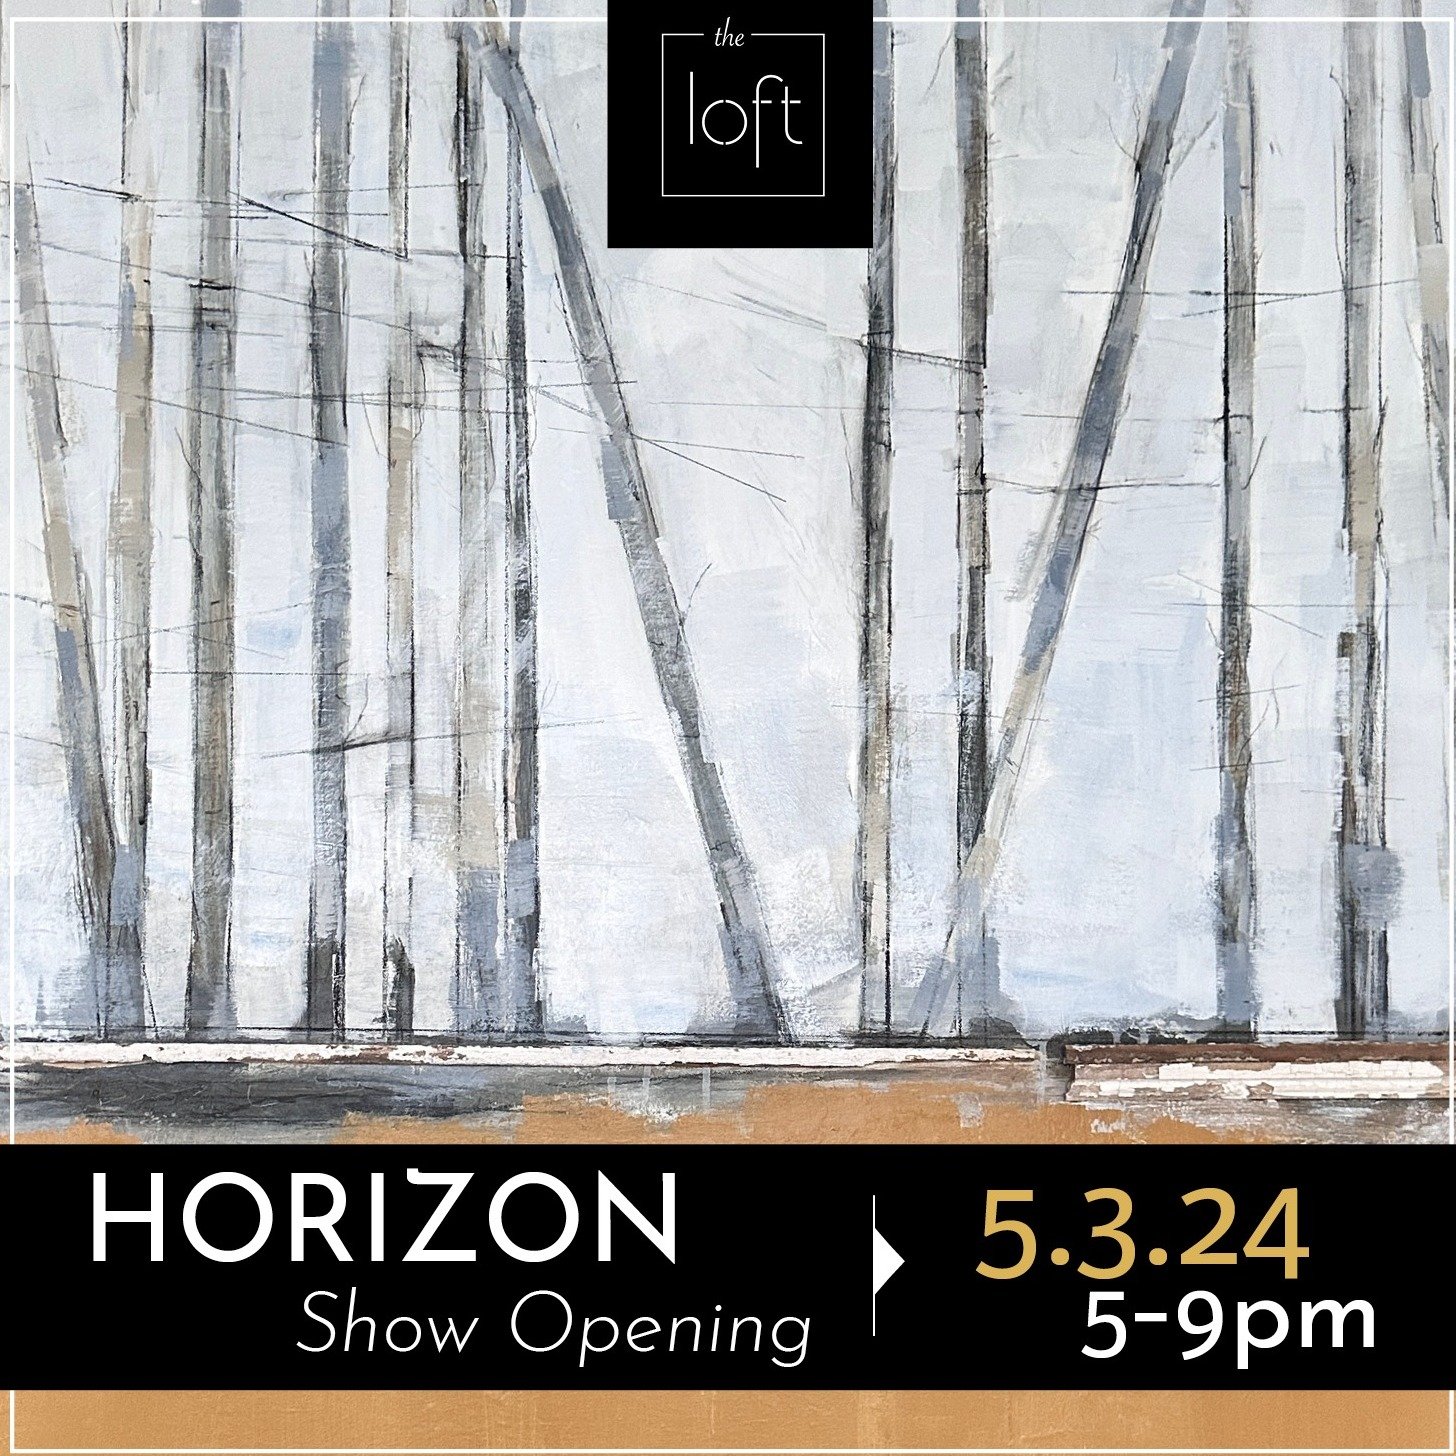 Our Grand Reopening is just TWO WEEKS away!
We are so excited to unveil HORIZON on May 3rd! This show will highlight all of the wonderful landscape paintings from our artists.